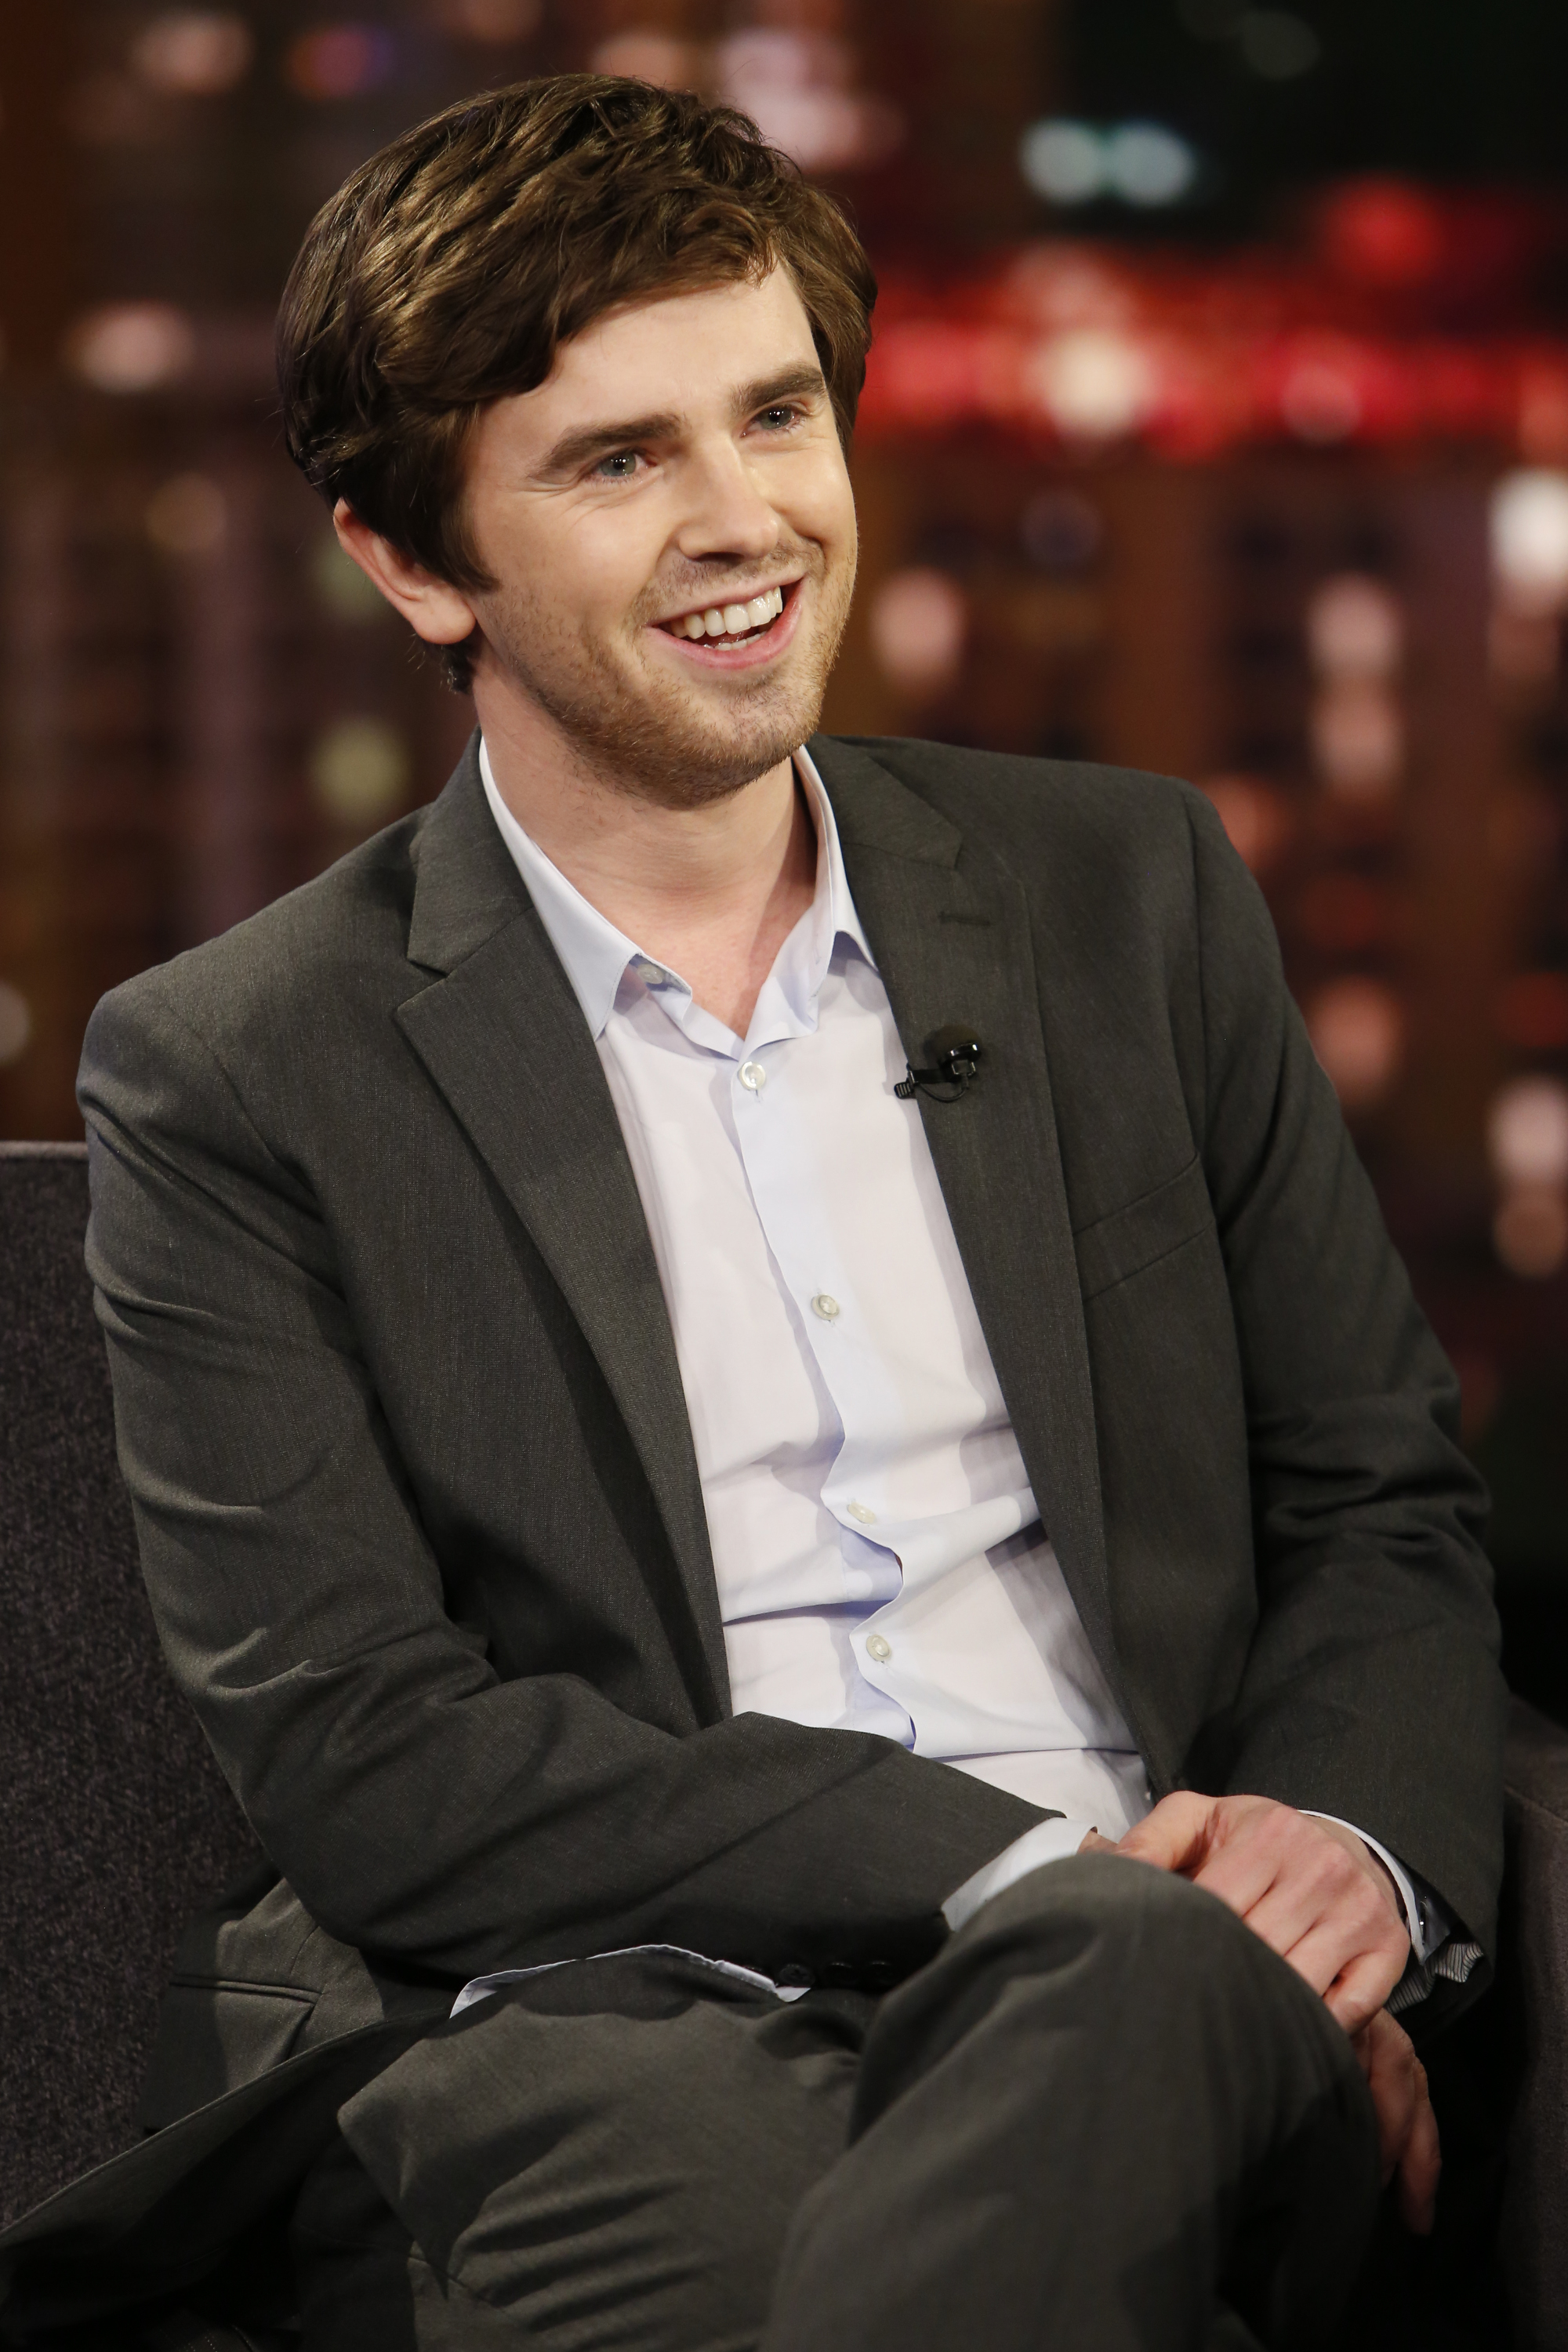 Freddie Highmore on "Jimmy Kimmel Live" on March 2, 2020 | Source: Getty Images